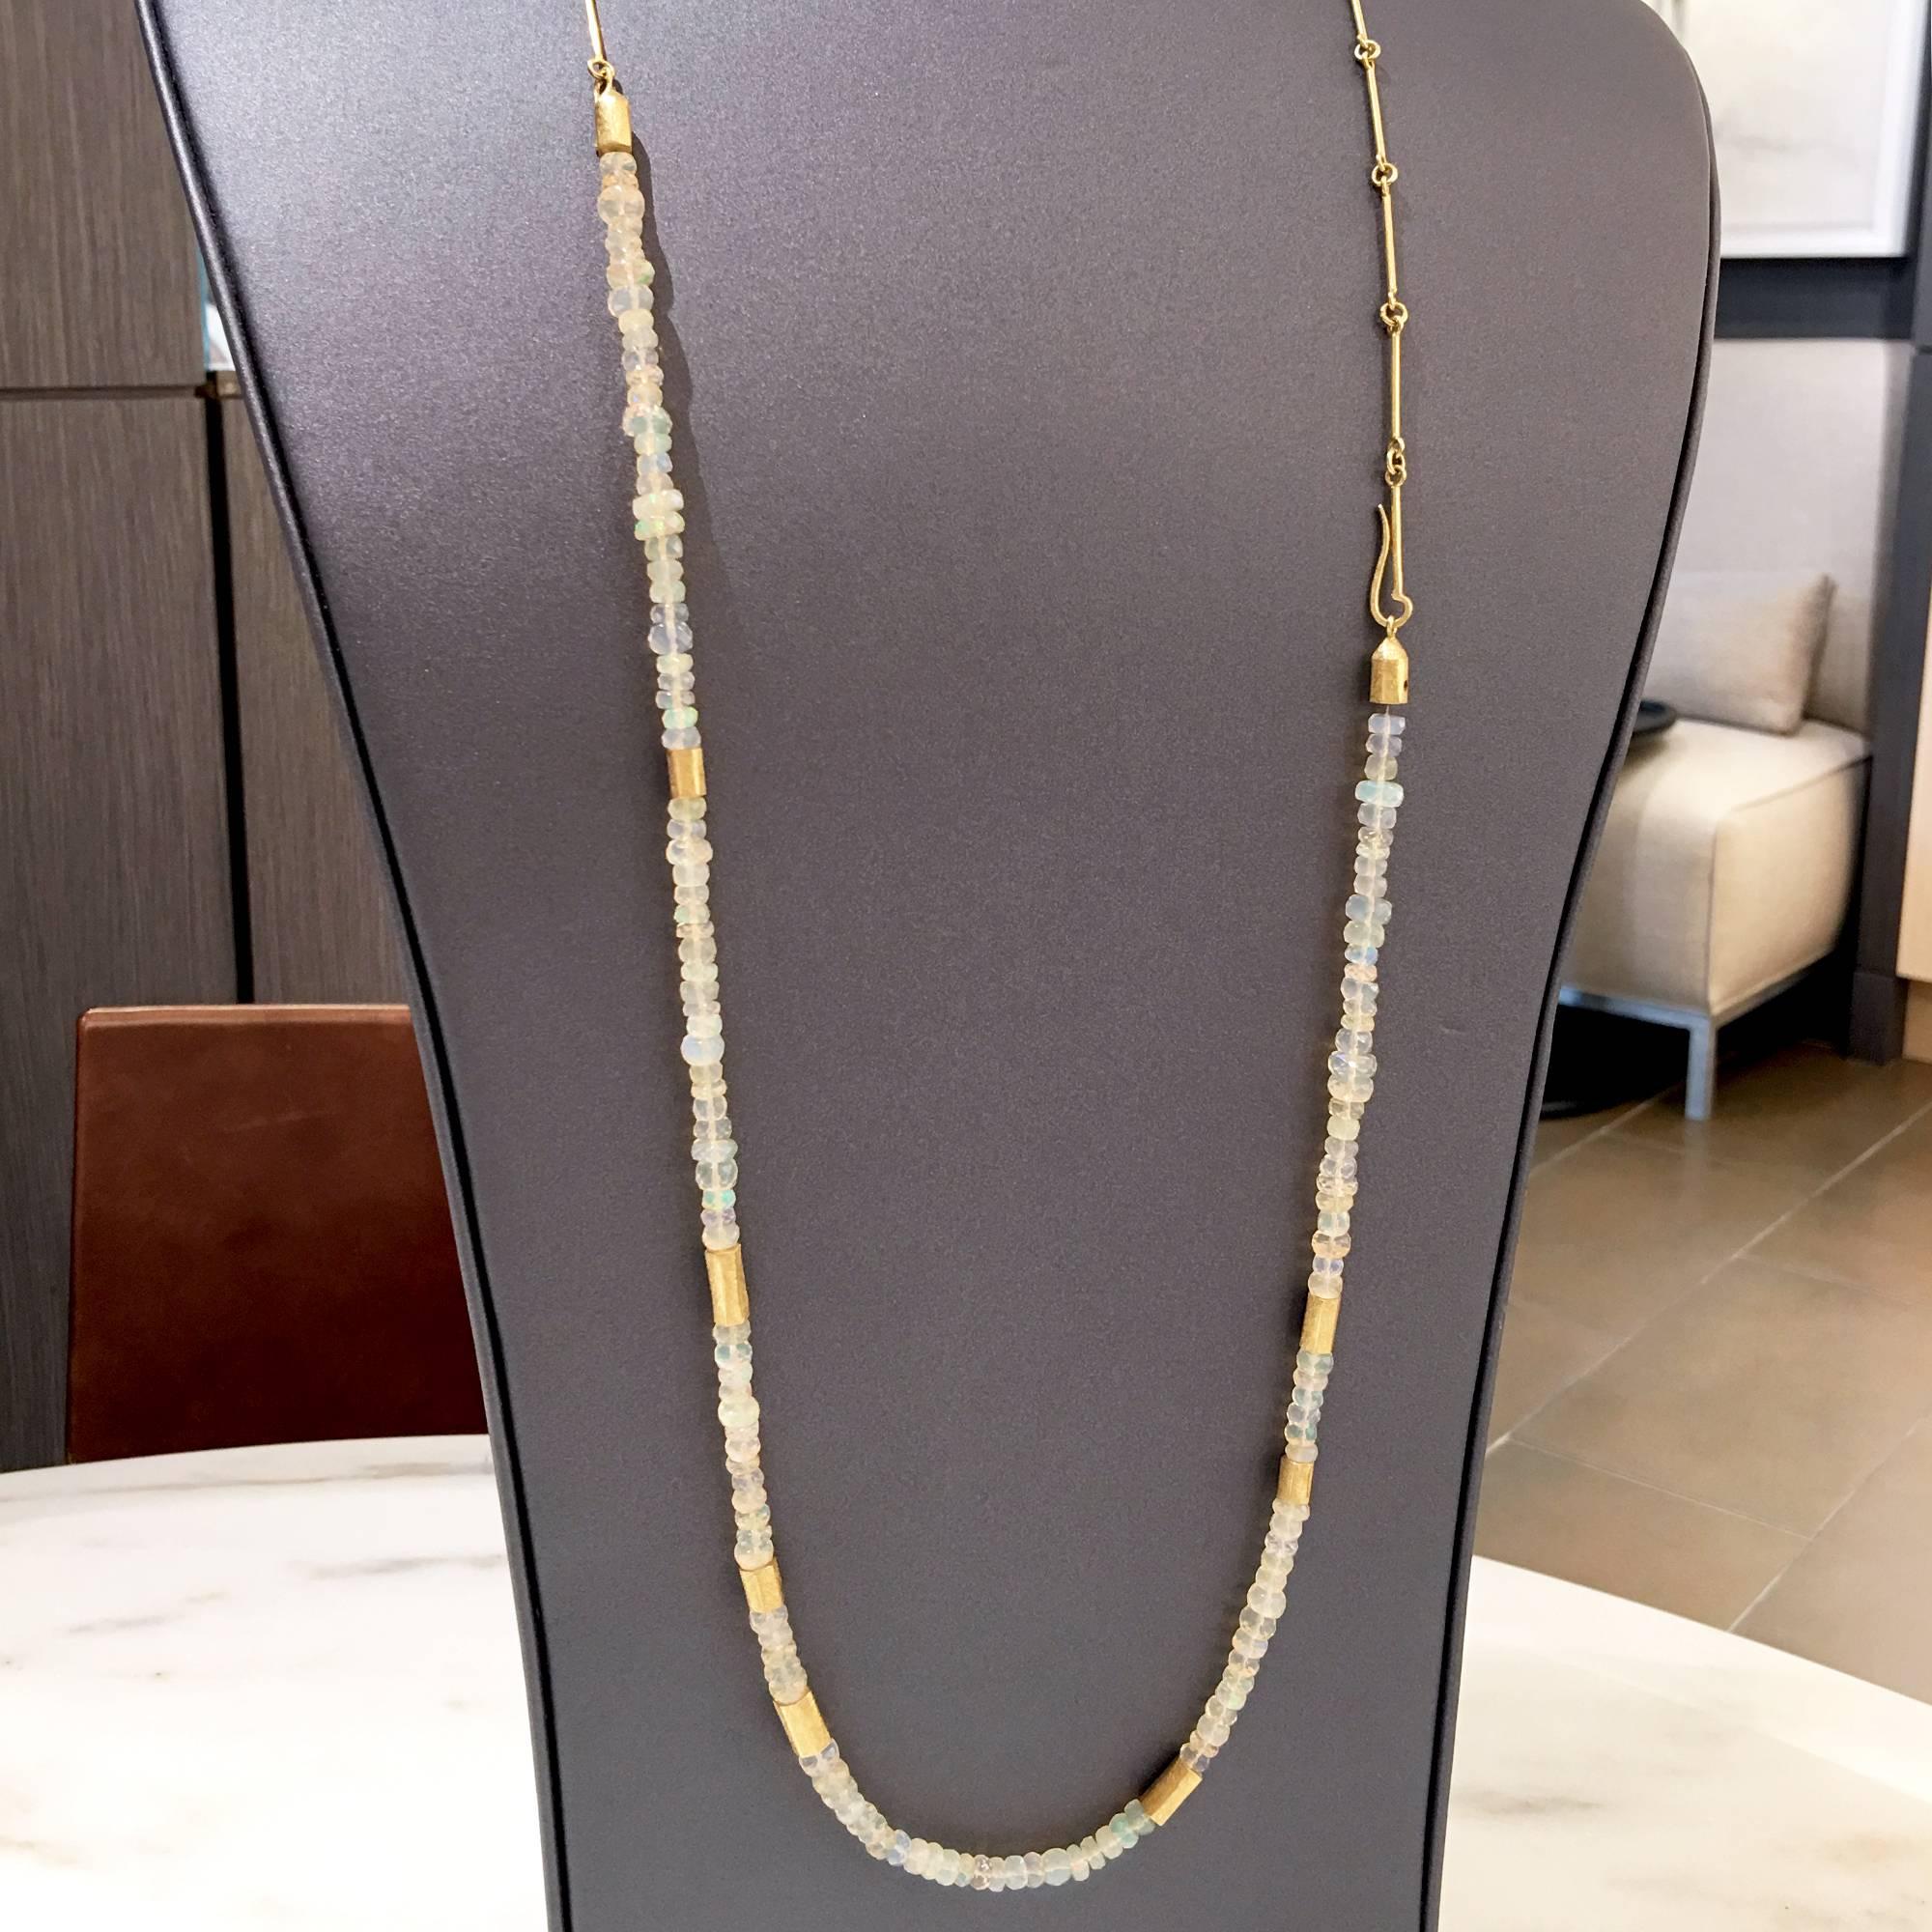 The possibilities are endless! This piece features two individual necklaces handcrafted by award-winning jewelry artist Petra Class in her signature-finished 18k yellow gold. The necklace showcases a strand of faceted Ethiopian opals separated by